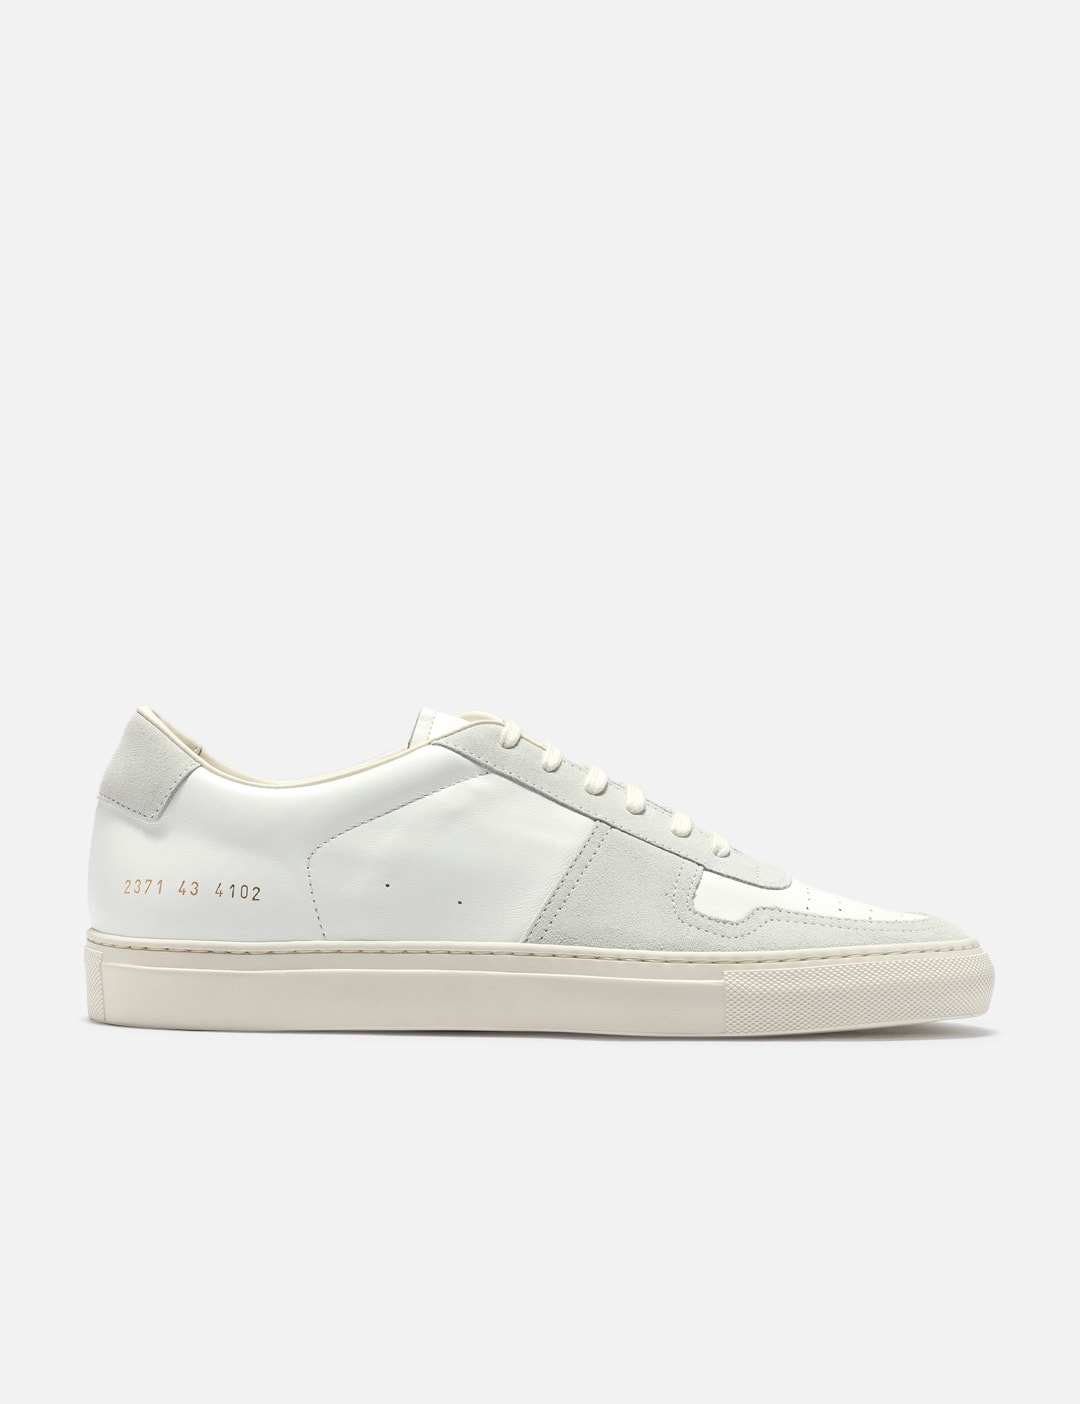 Common Projects - BBALL SUMMER EDITION SNEAKERS | HBX - Globally ...